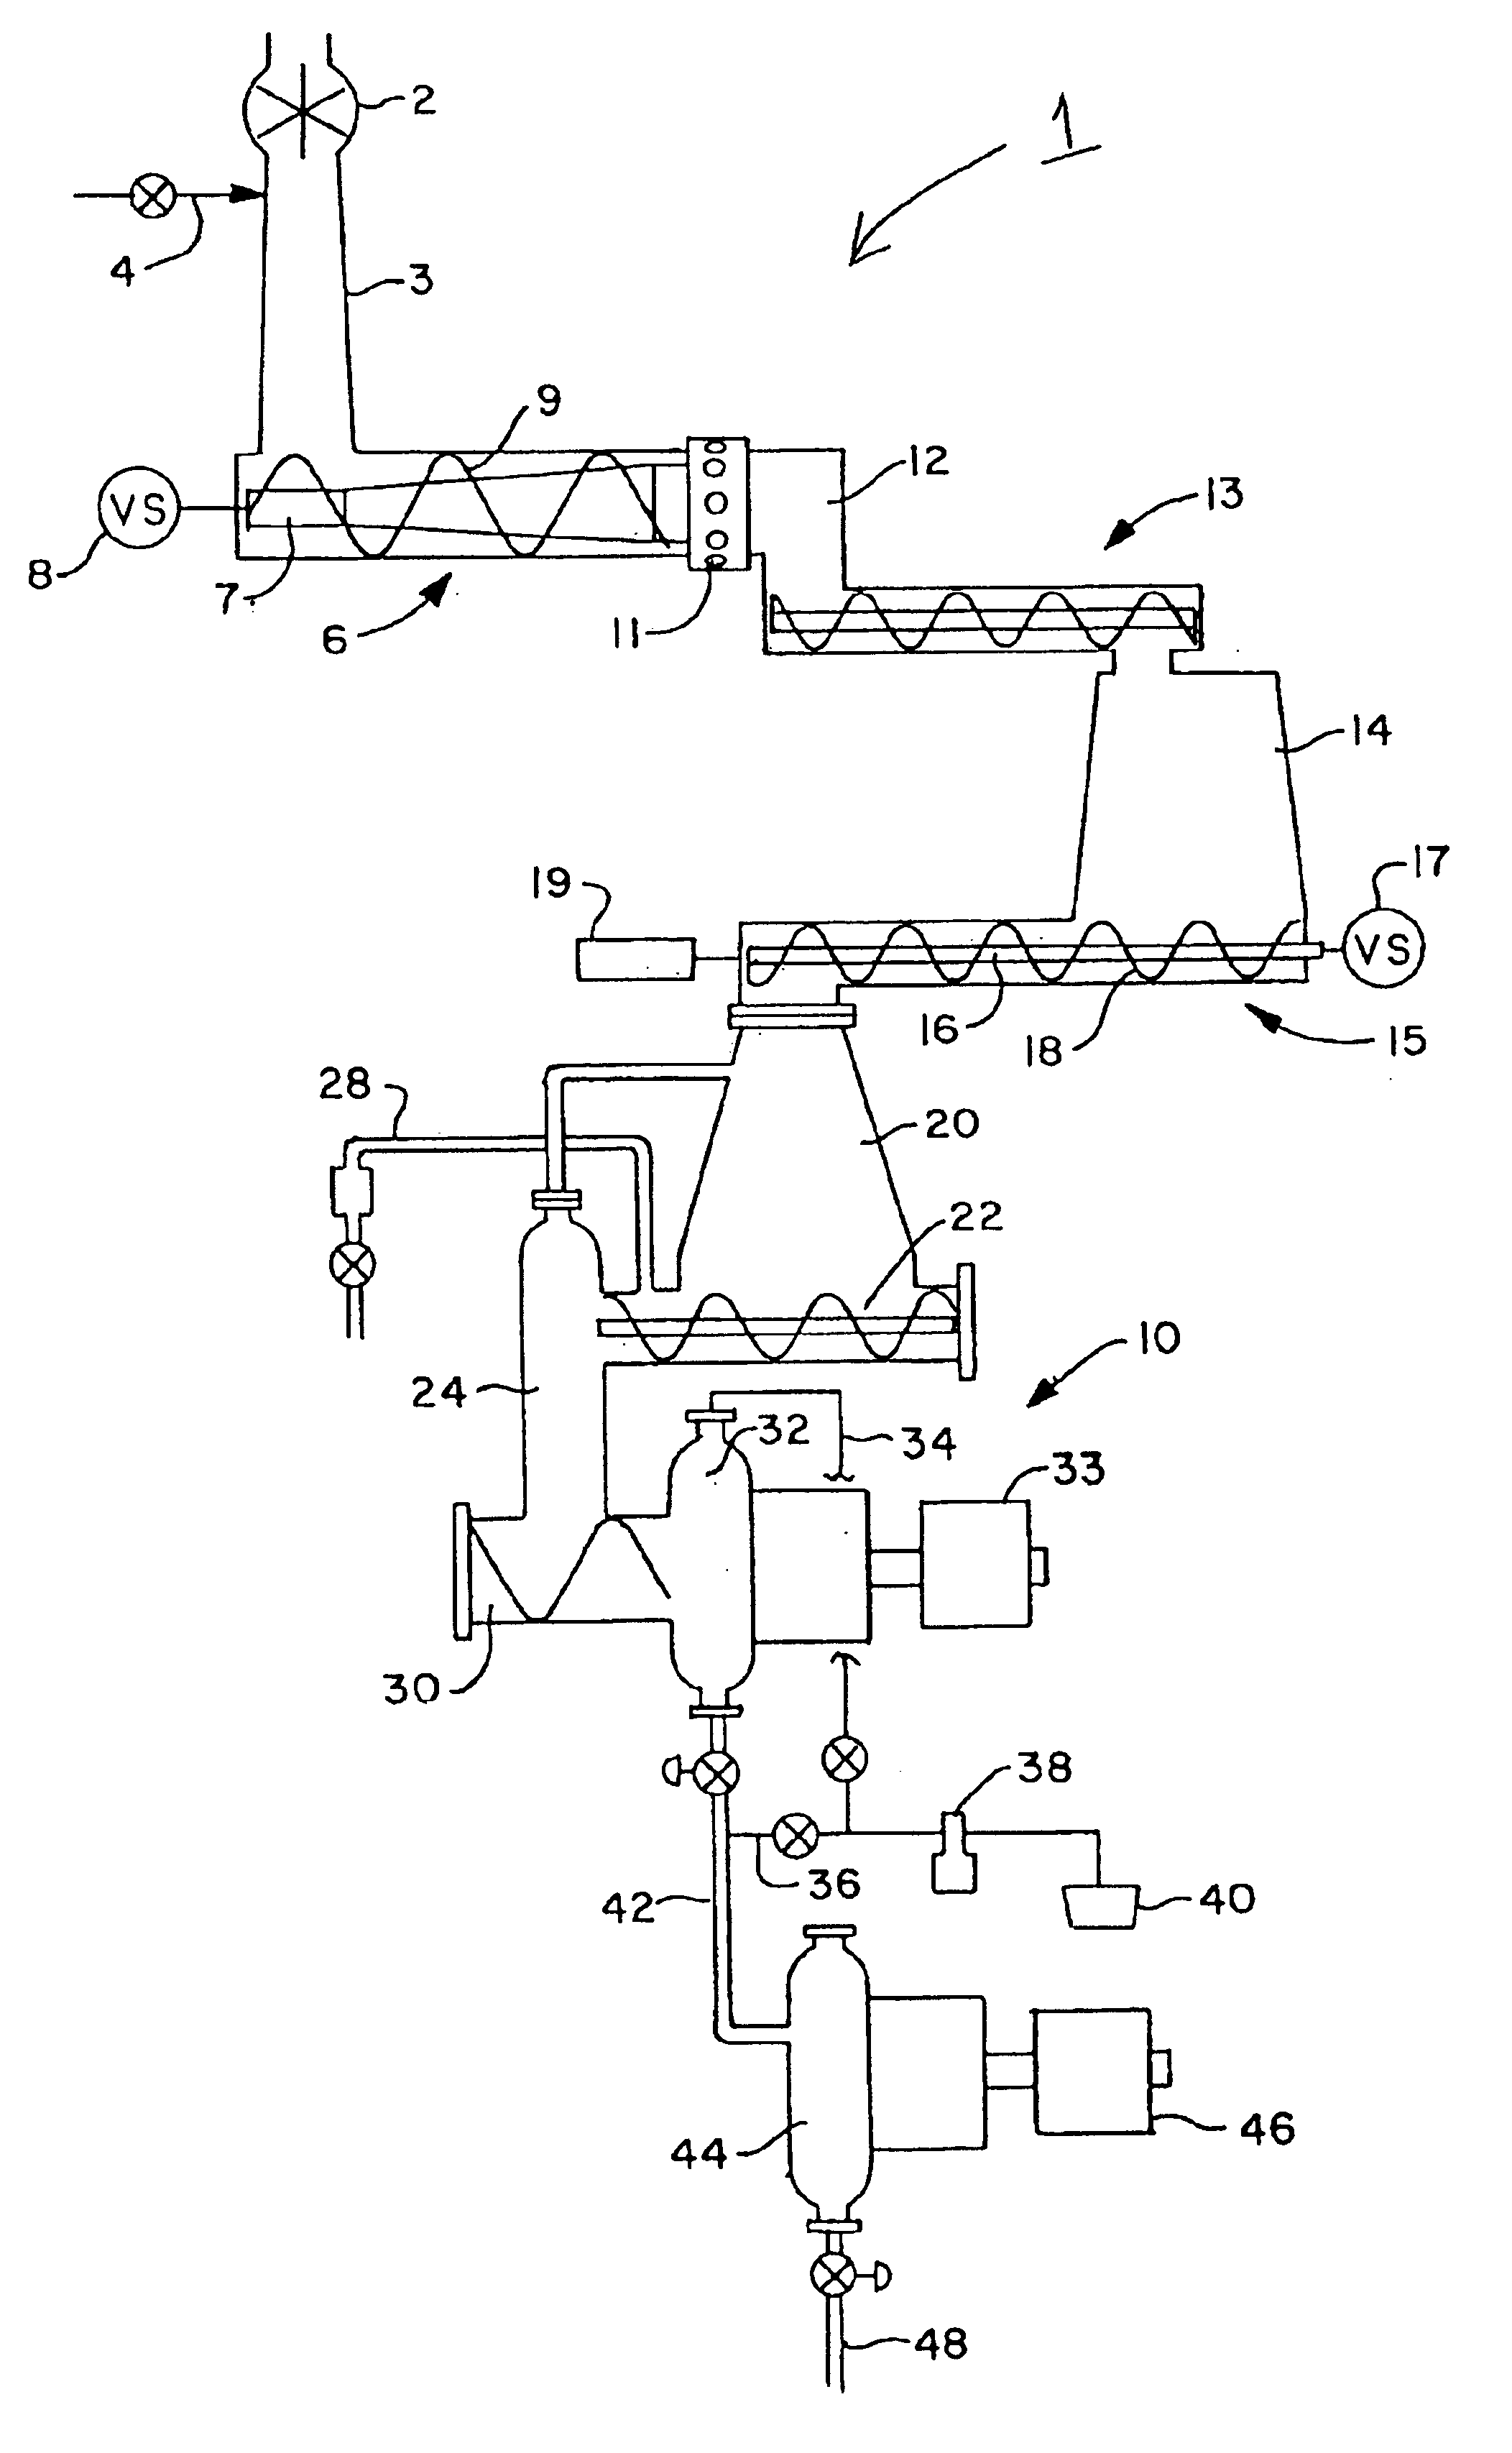 Method of pretreating lignocellulose fiber-containing material in a pulp refining process